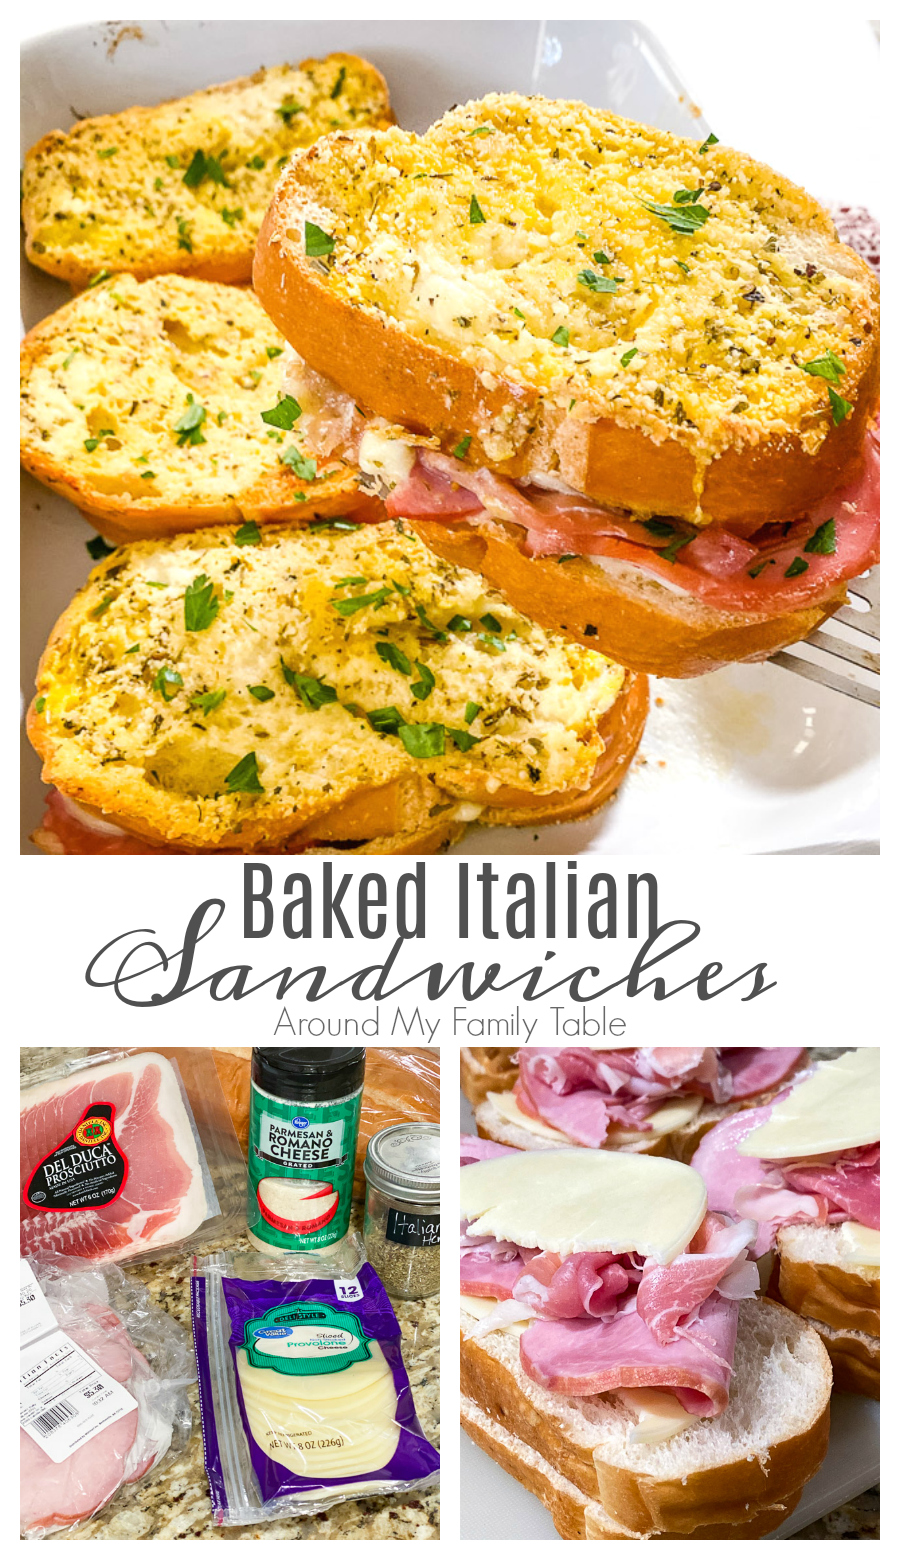 Baked Italian Hoagie Recipe - a quick and easy sandwich recipe.